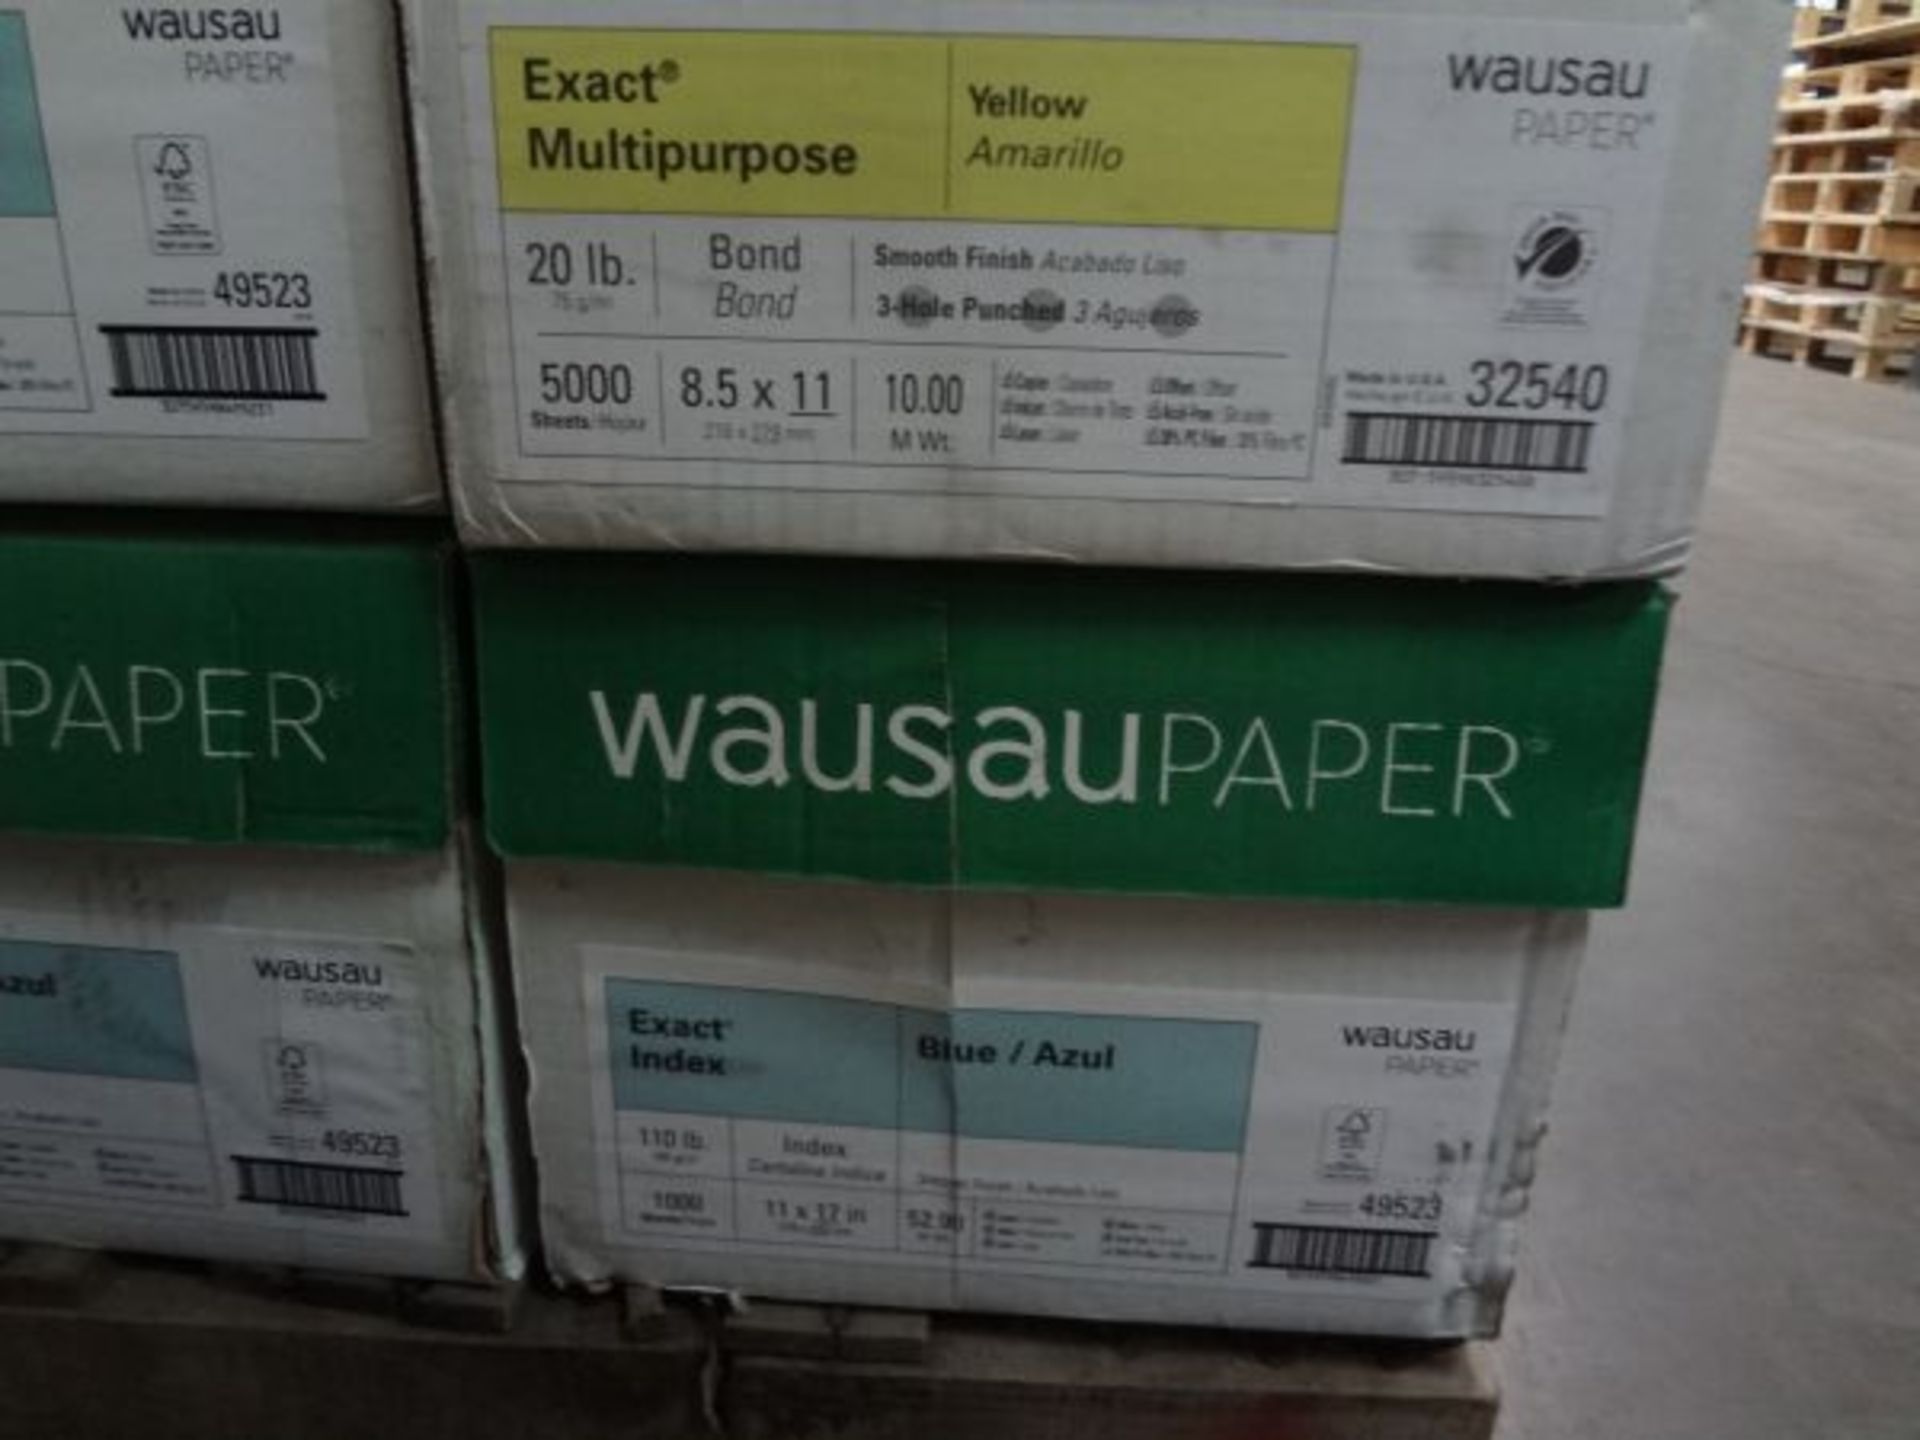 (5) CASES 11" X 17" WAUSAU PAPER EXACT INDEX BLUE PAPER, (3) CASES WAUSAU PAPER EXACT MULTIPURPOSE - Image 2 of 3